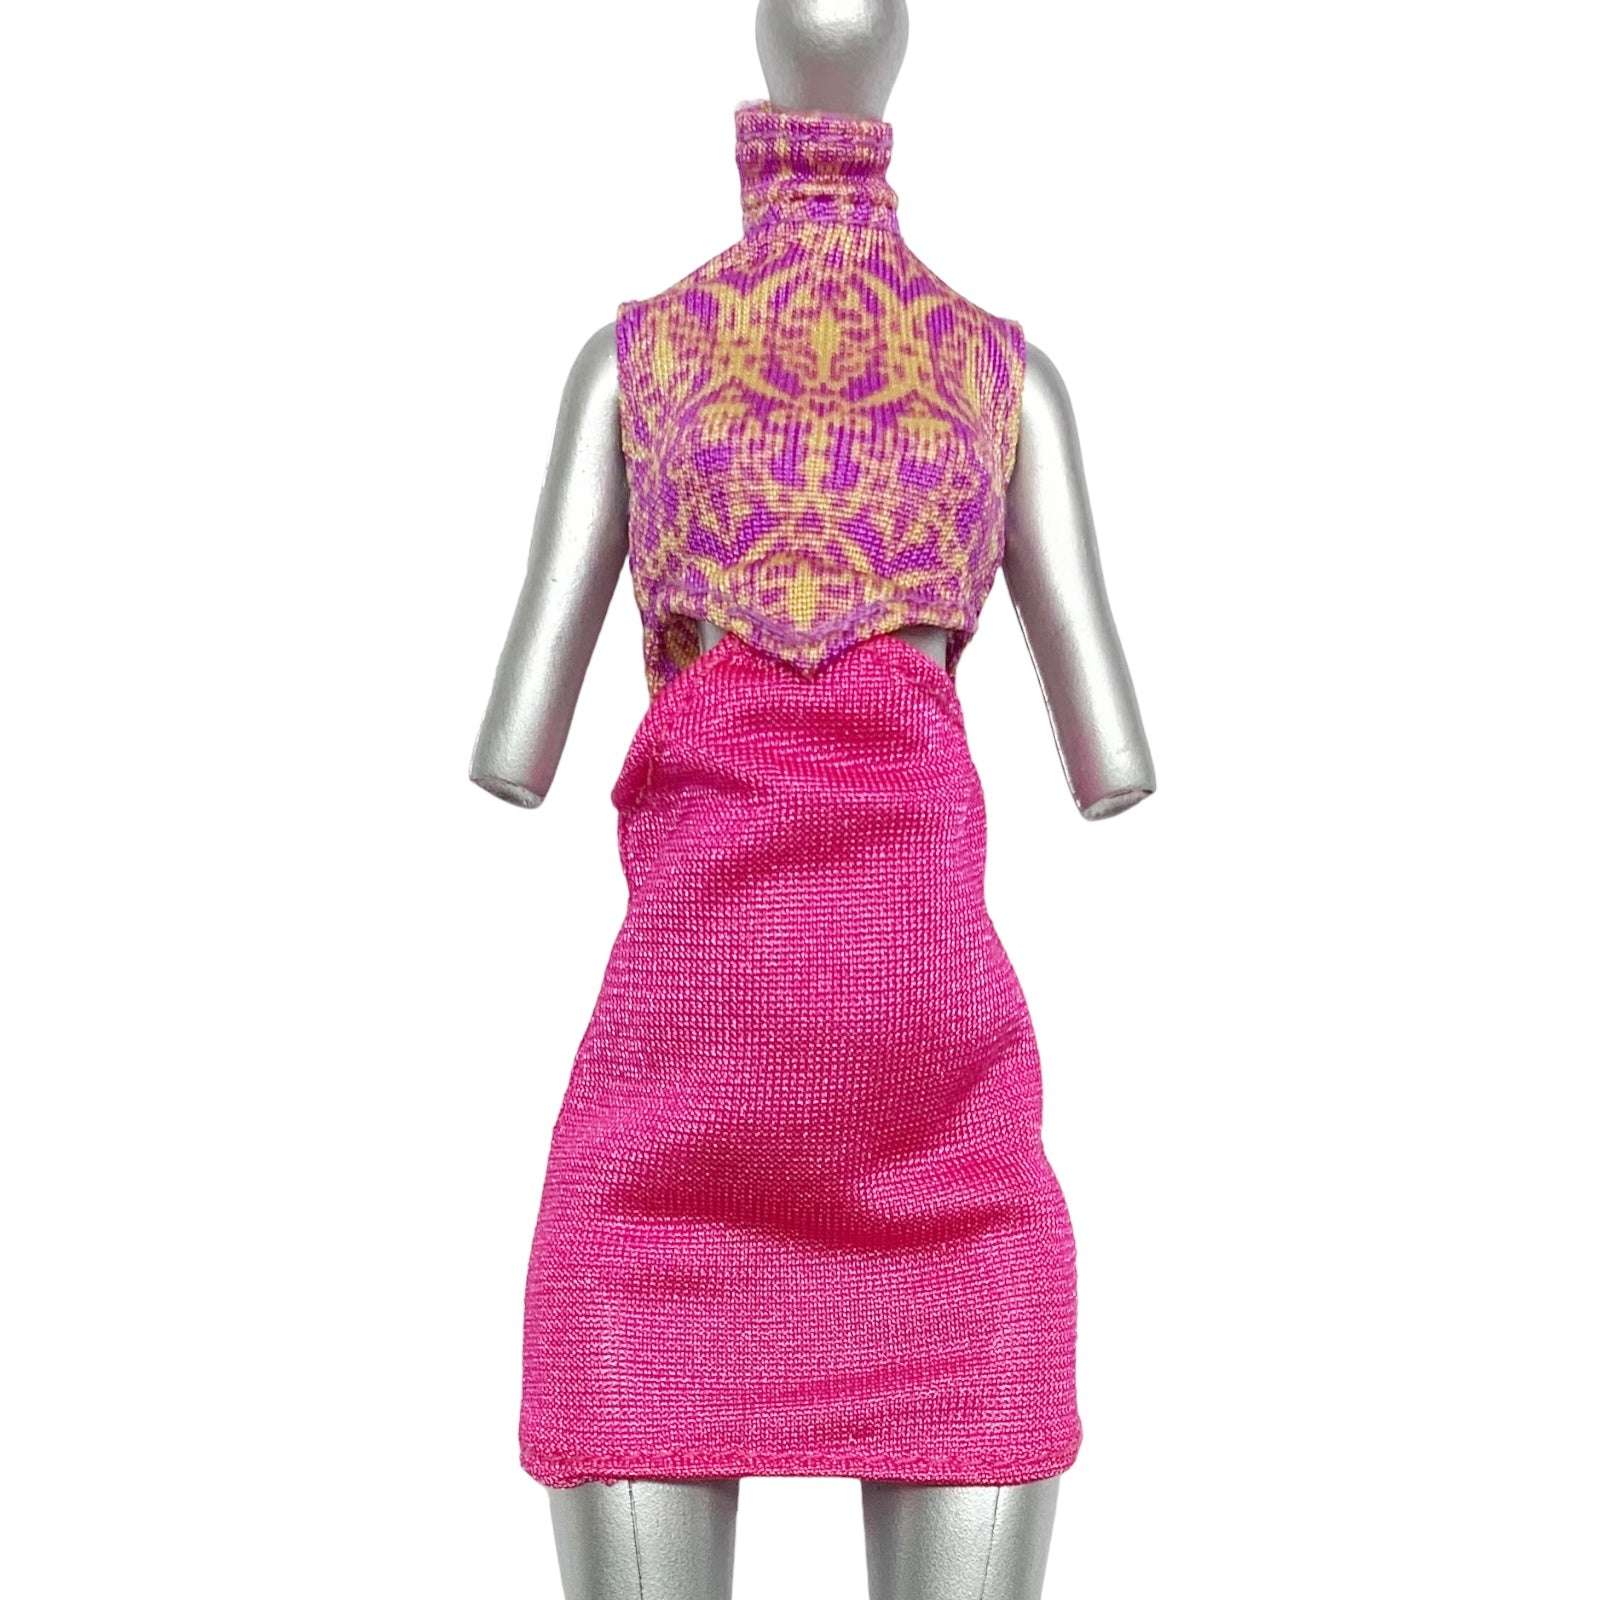 Monster High I Heart Fashion Djinni Whisp Doll Outfit Replacement Pink Dress